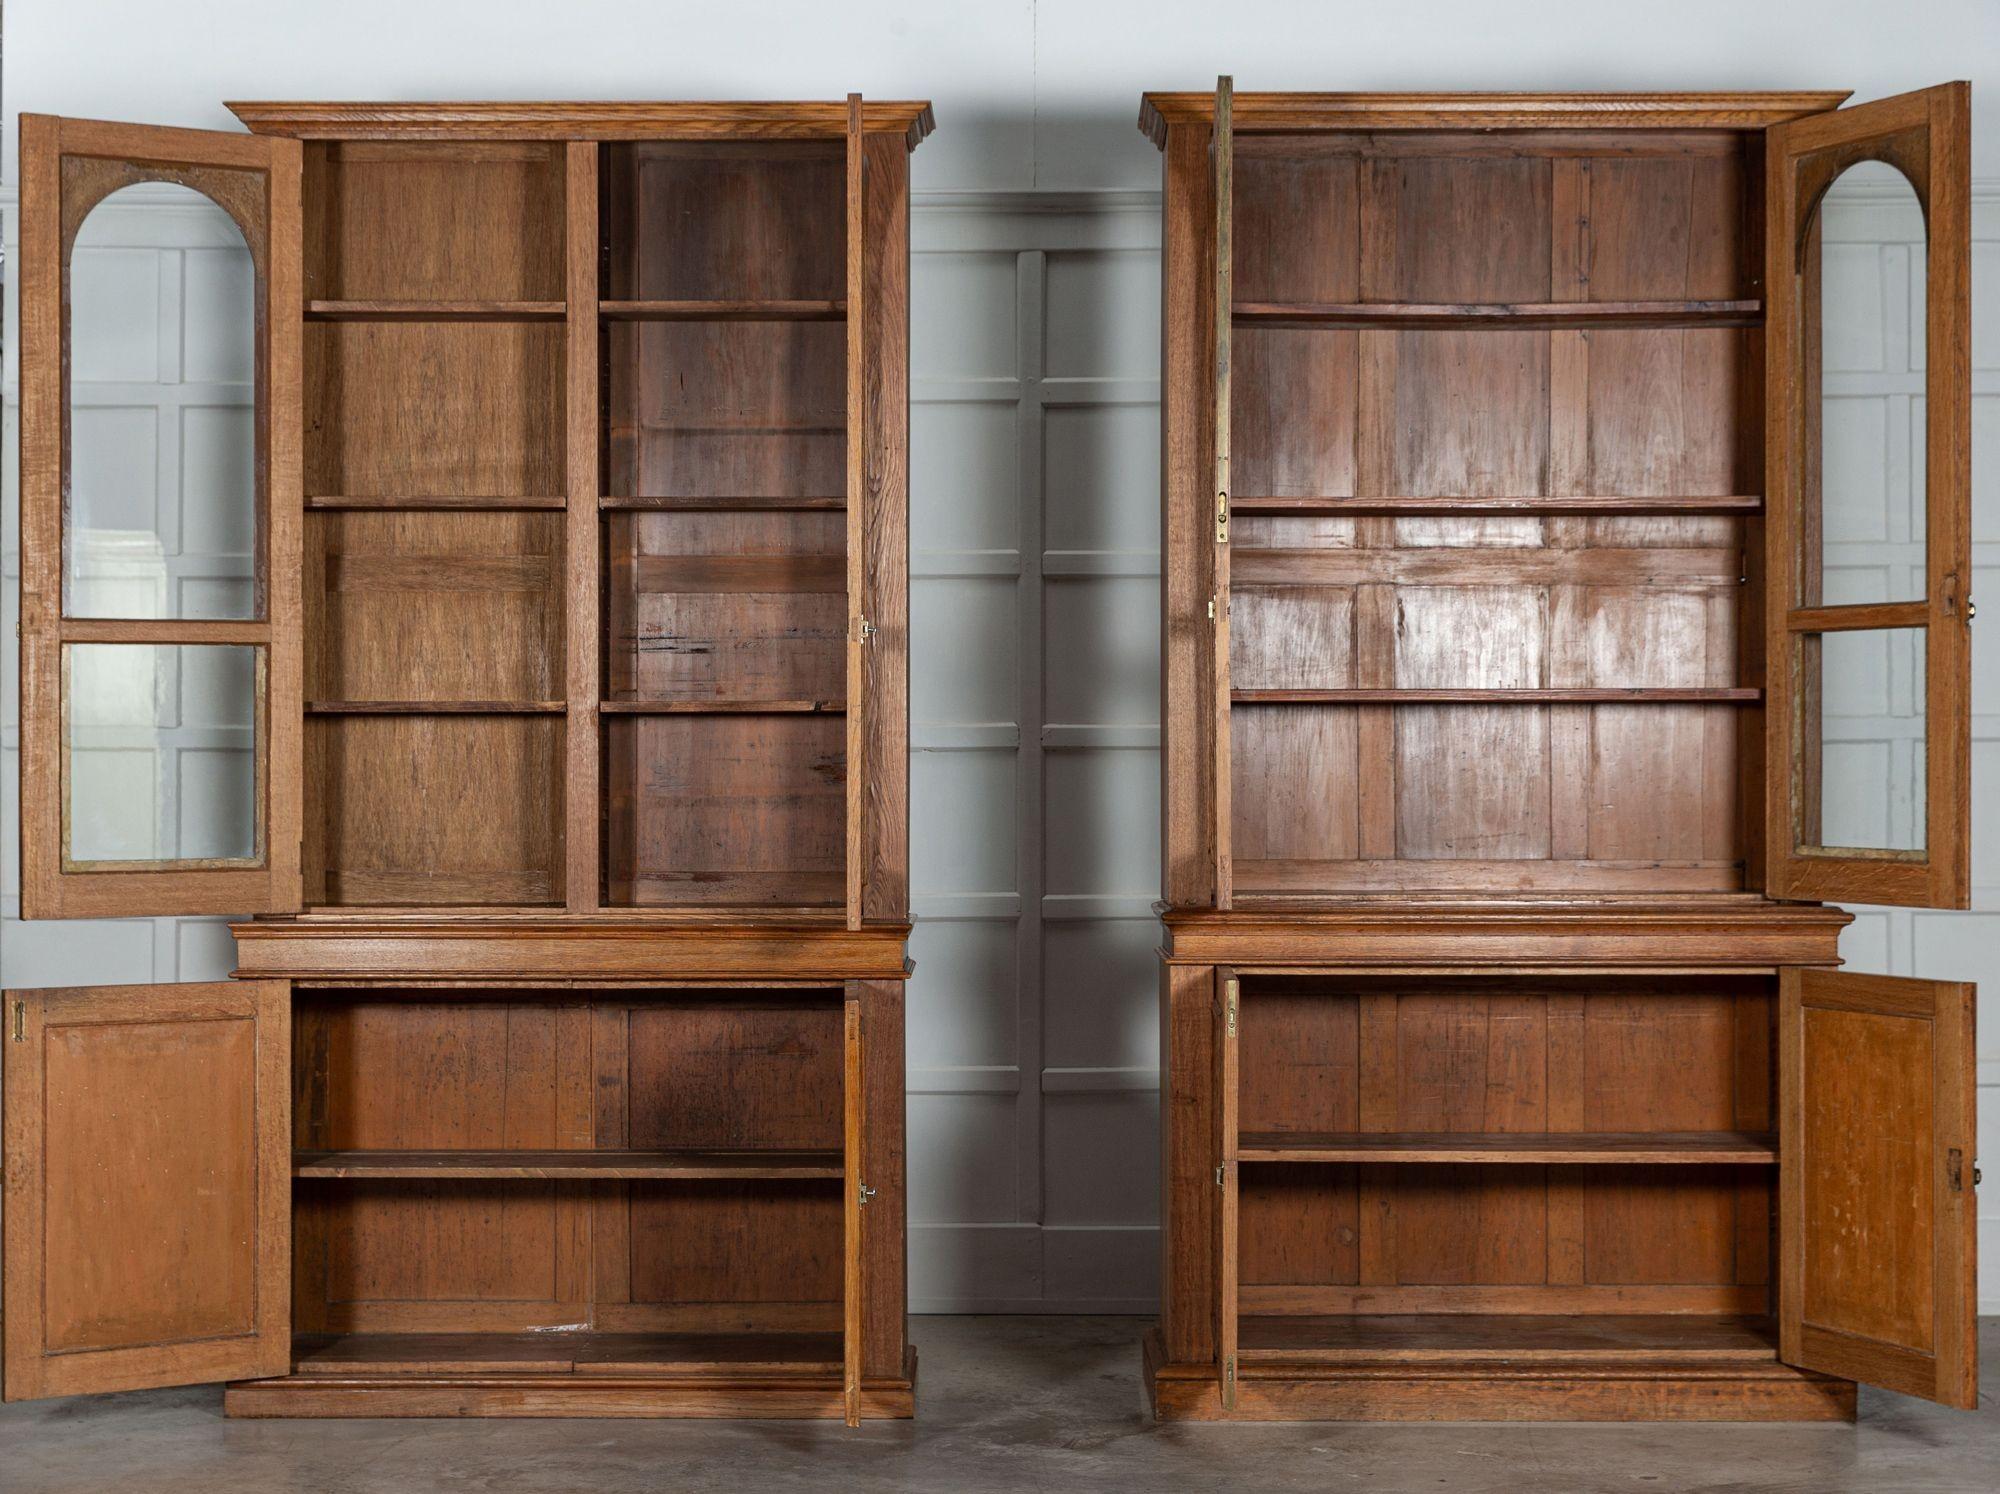 circa 1940
Near pair arched English oak glazed apothecary cabinets.
Provenance: Apothecary on Lavender Hill, Battersea London.
We can also customise existing pieces to suit your scheme/requirements. We have our own workshop, restorers and